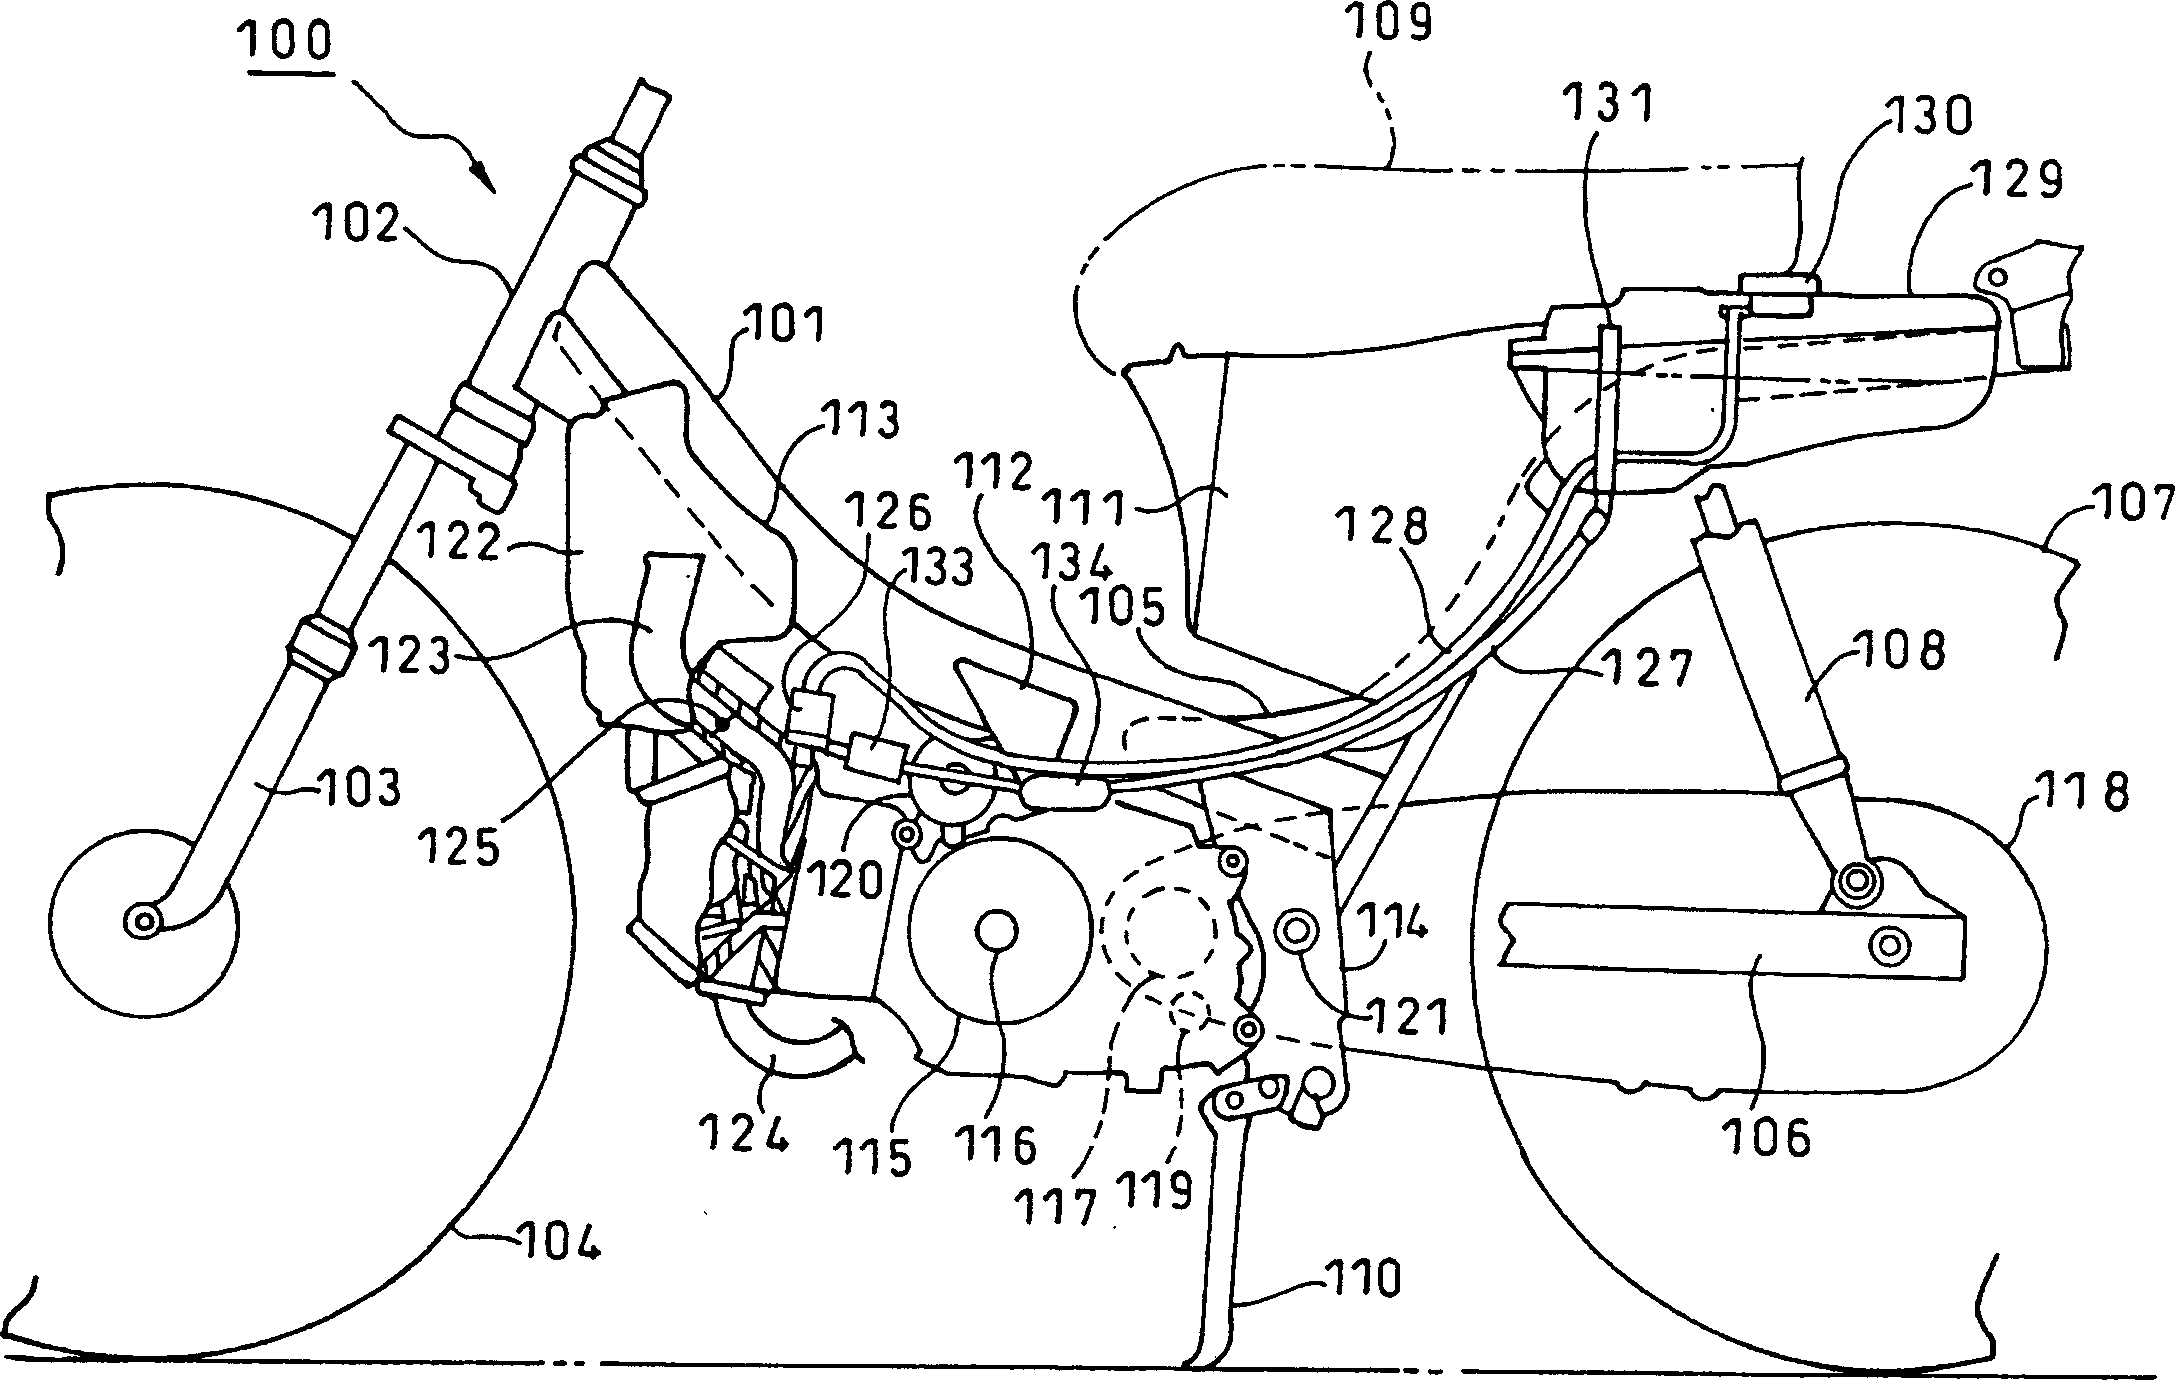 Fuel device and pump, injector